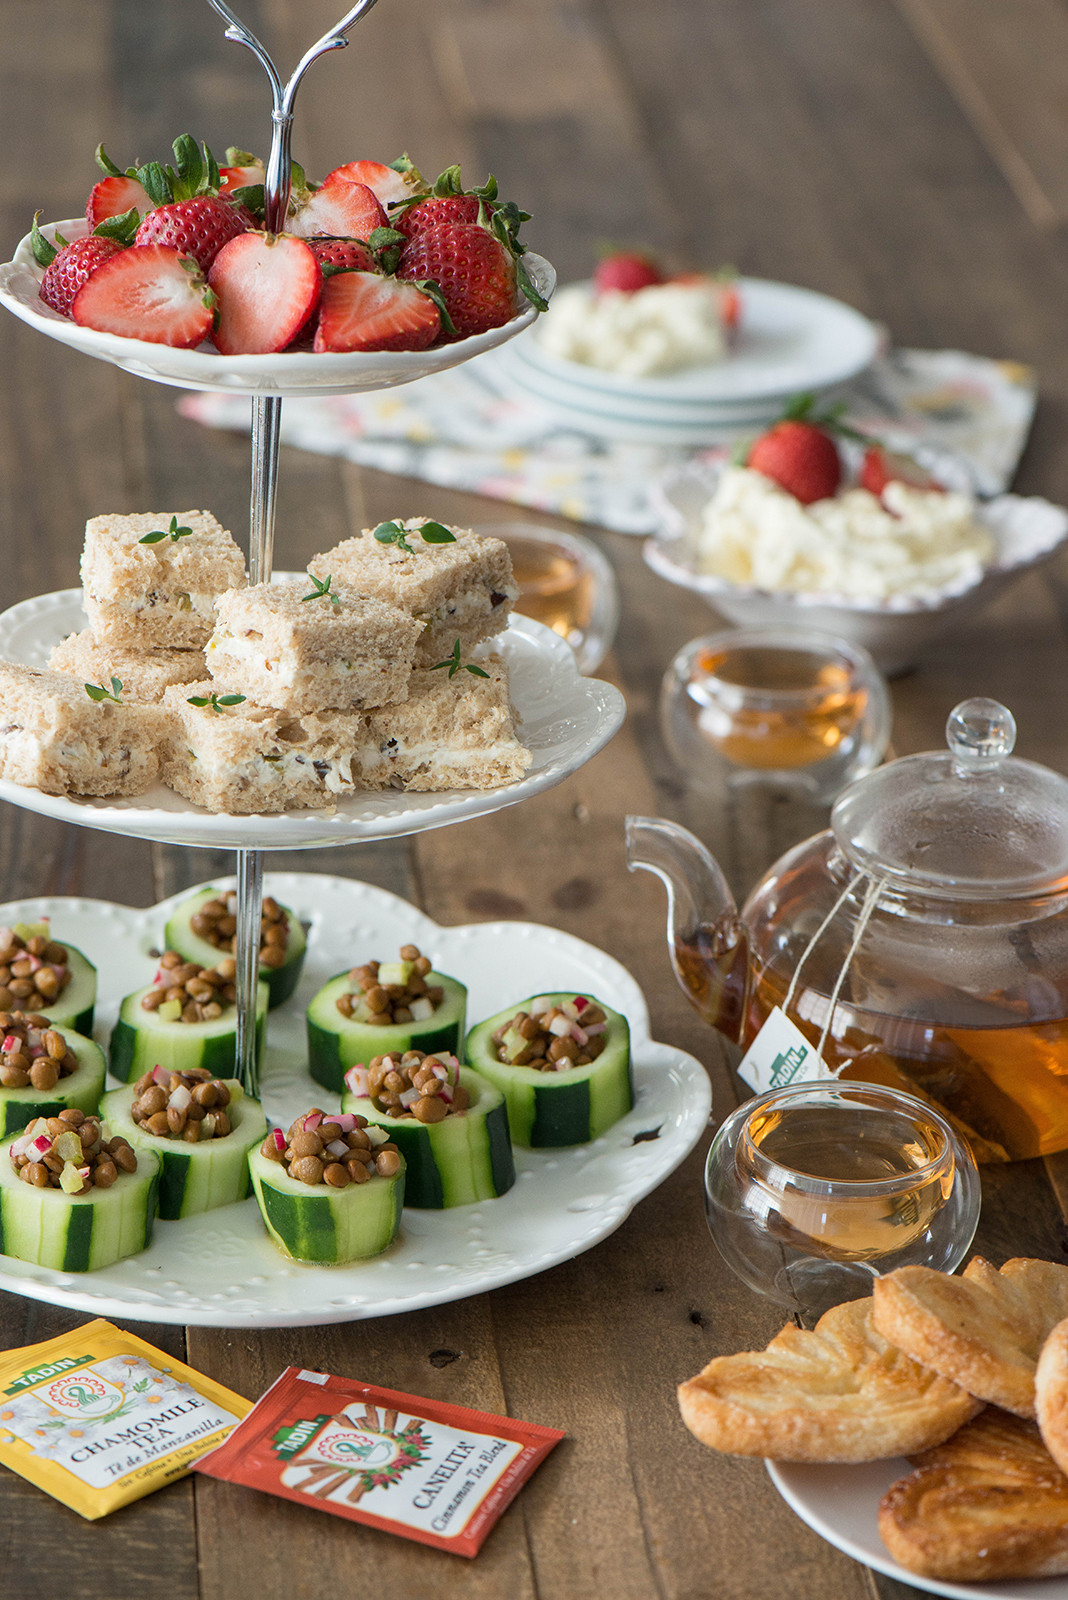 Ideas For Tea Party Food
 A Simple Tea Party Menu Nibbles and Feasts